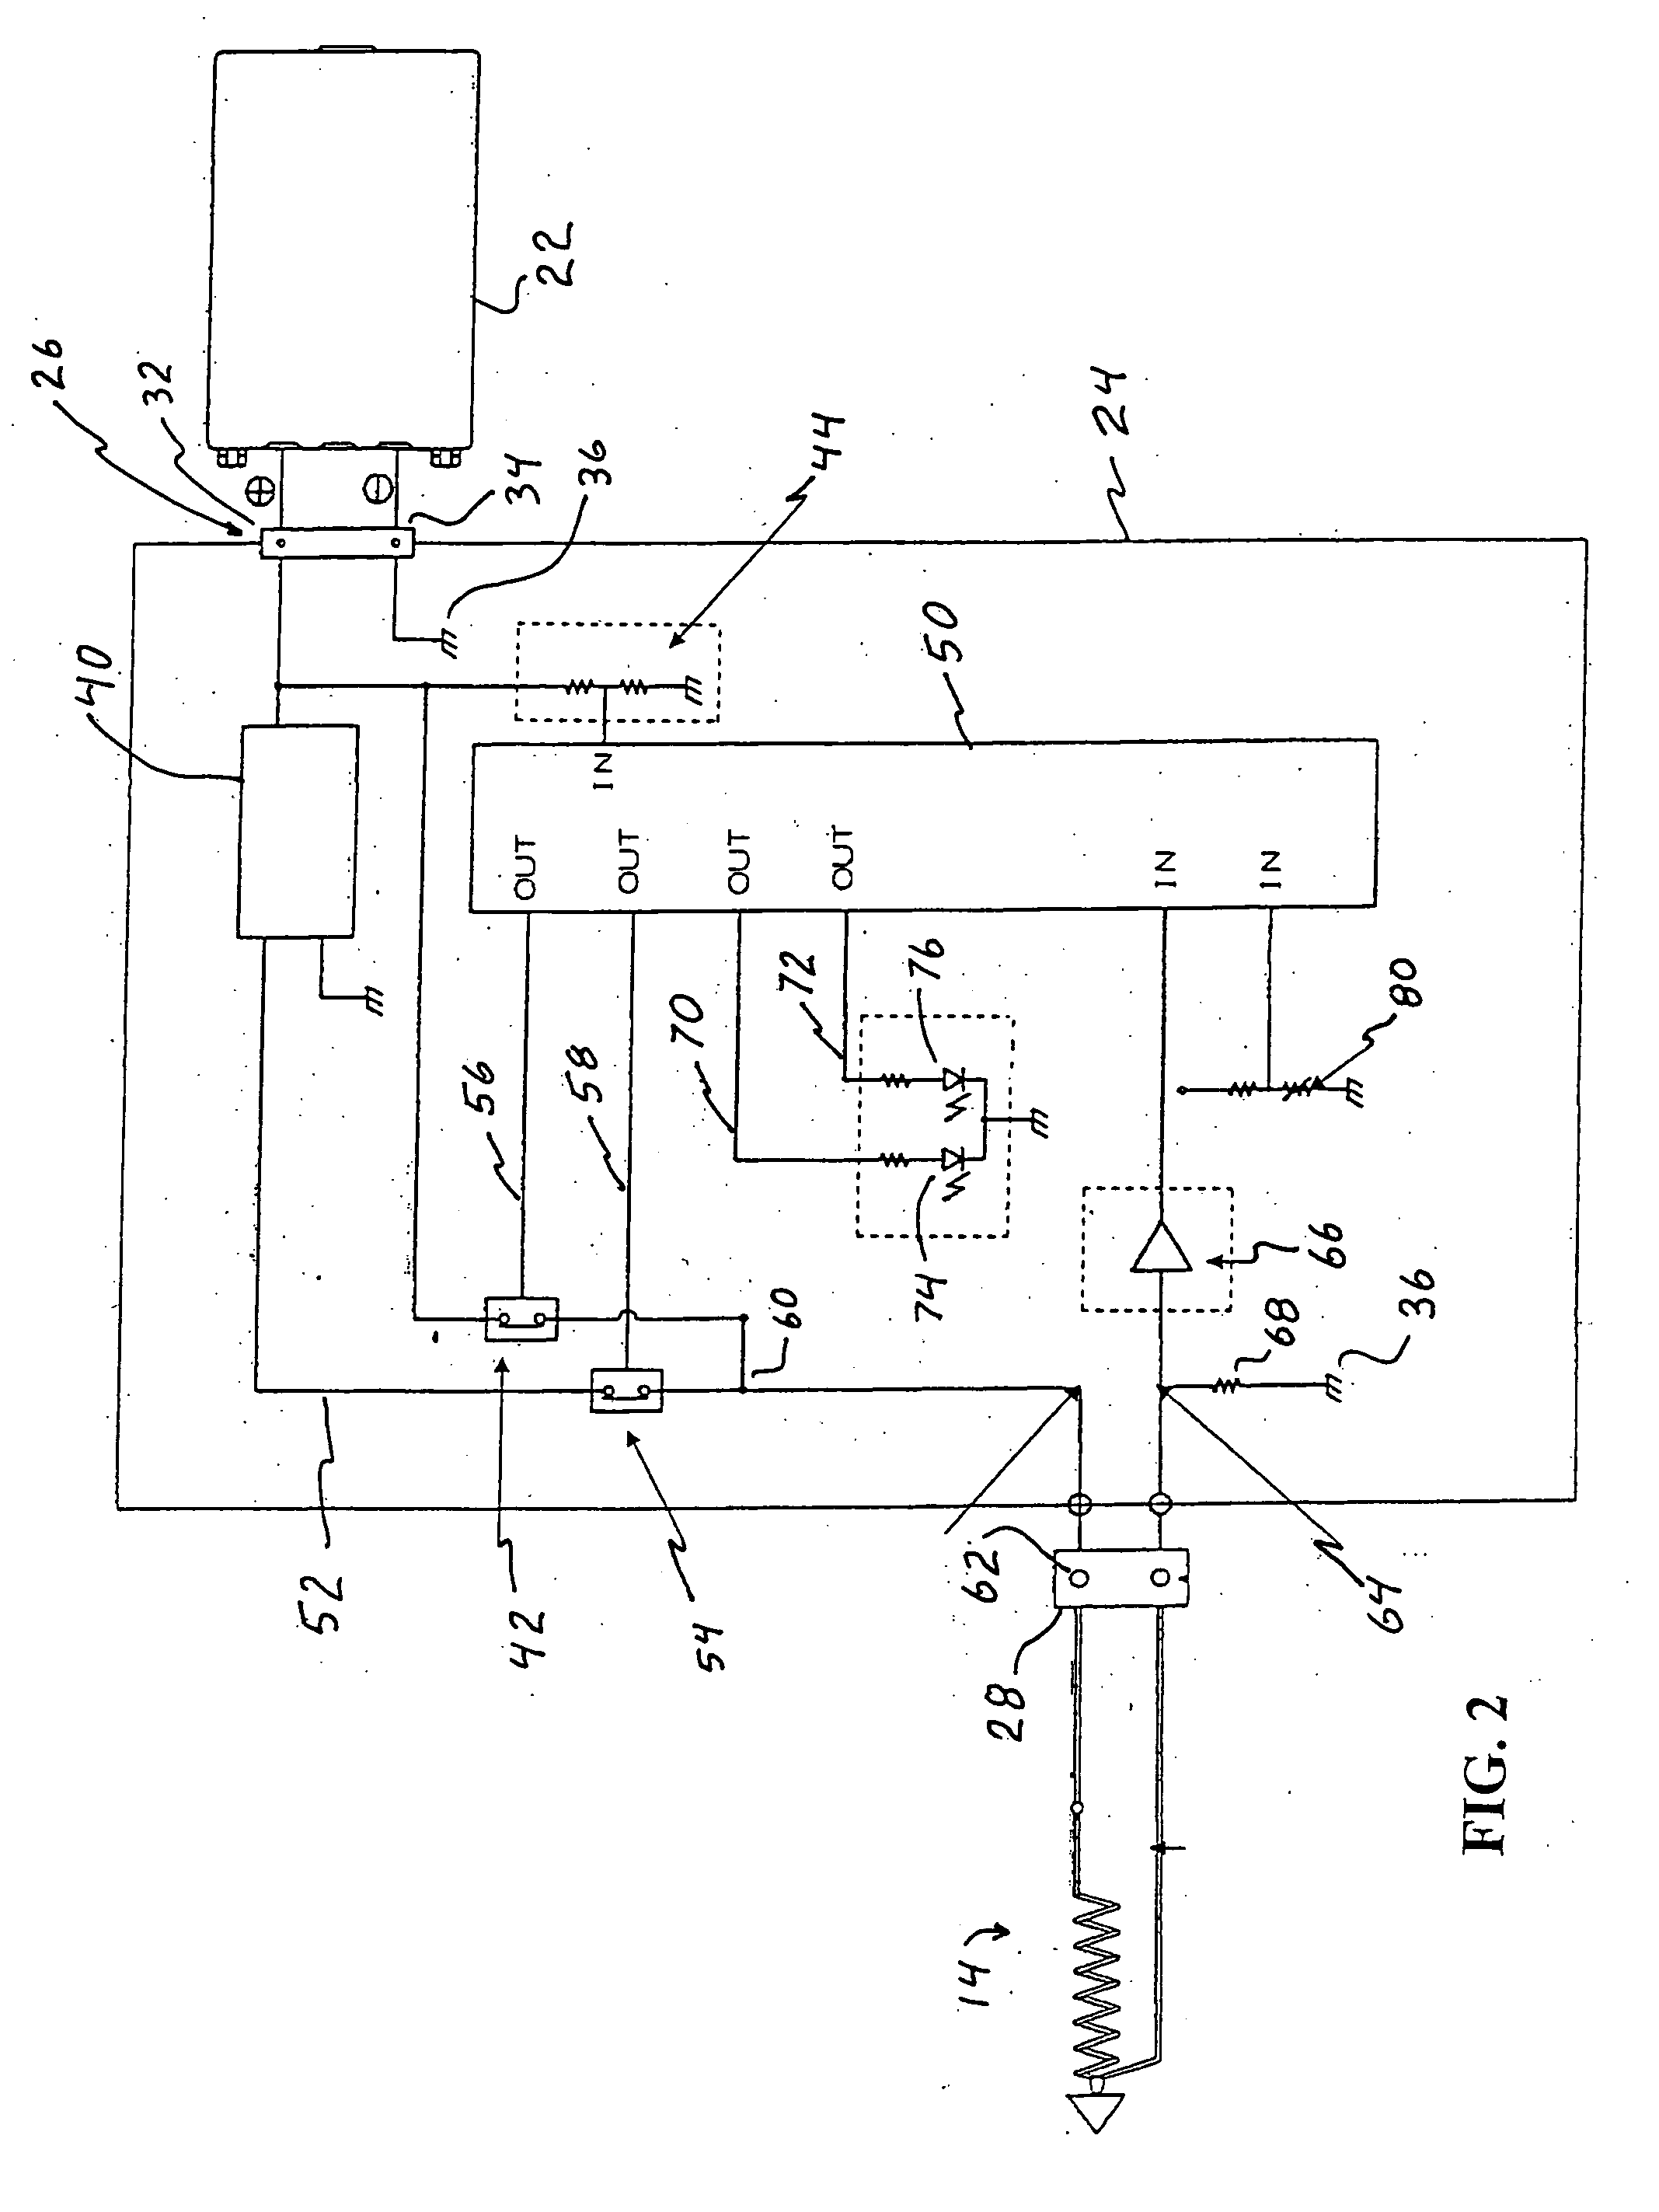 Control system for battery powered heating device